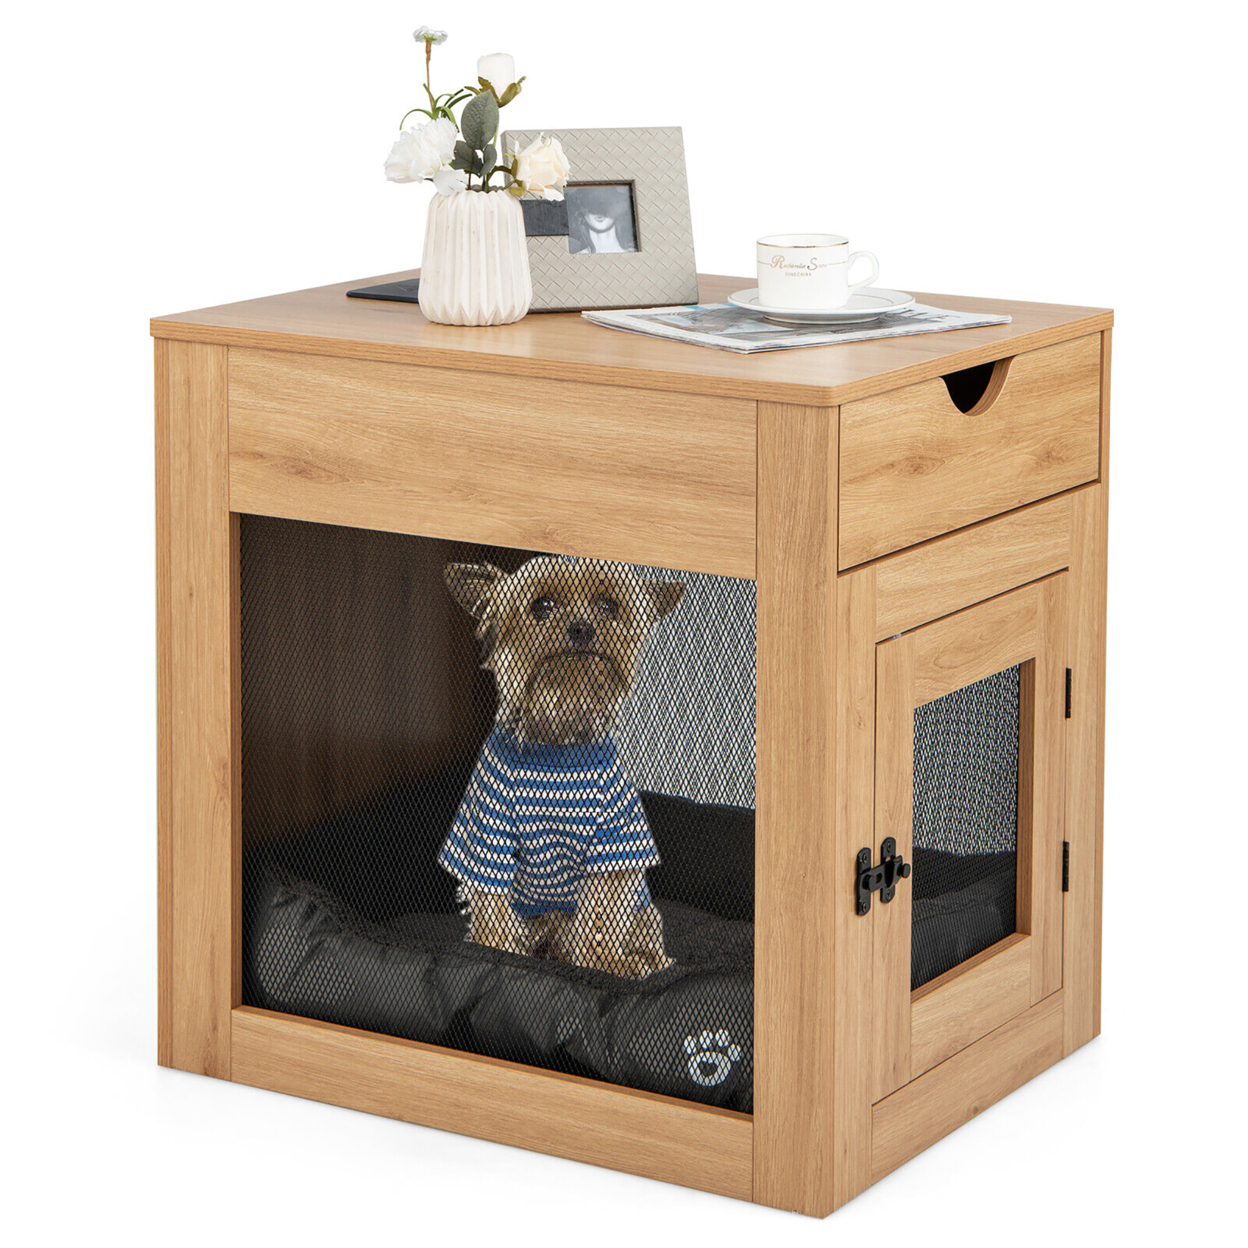 Furniture Style Dog Crate Cage End Table W/ Lockable Door Chew-proof Metal Grid